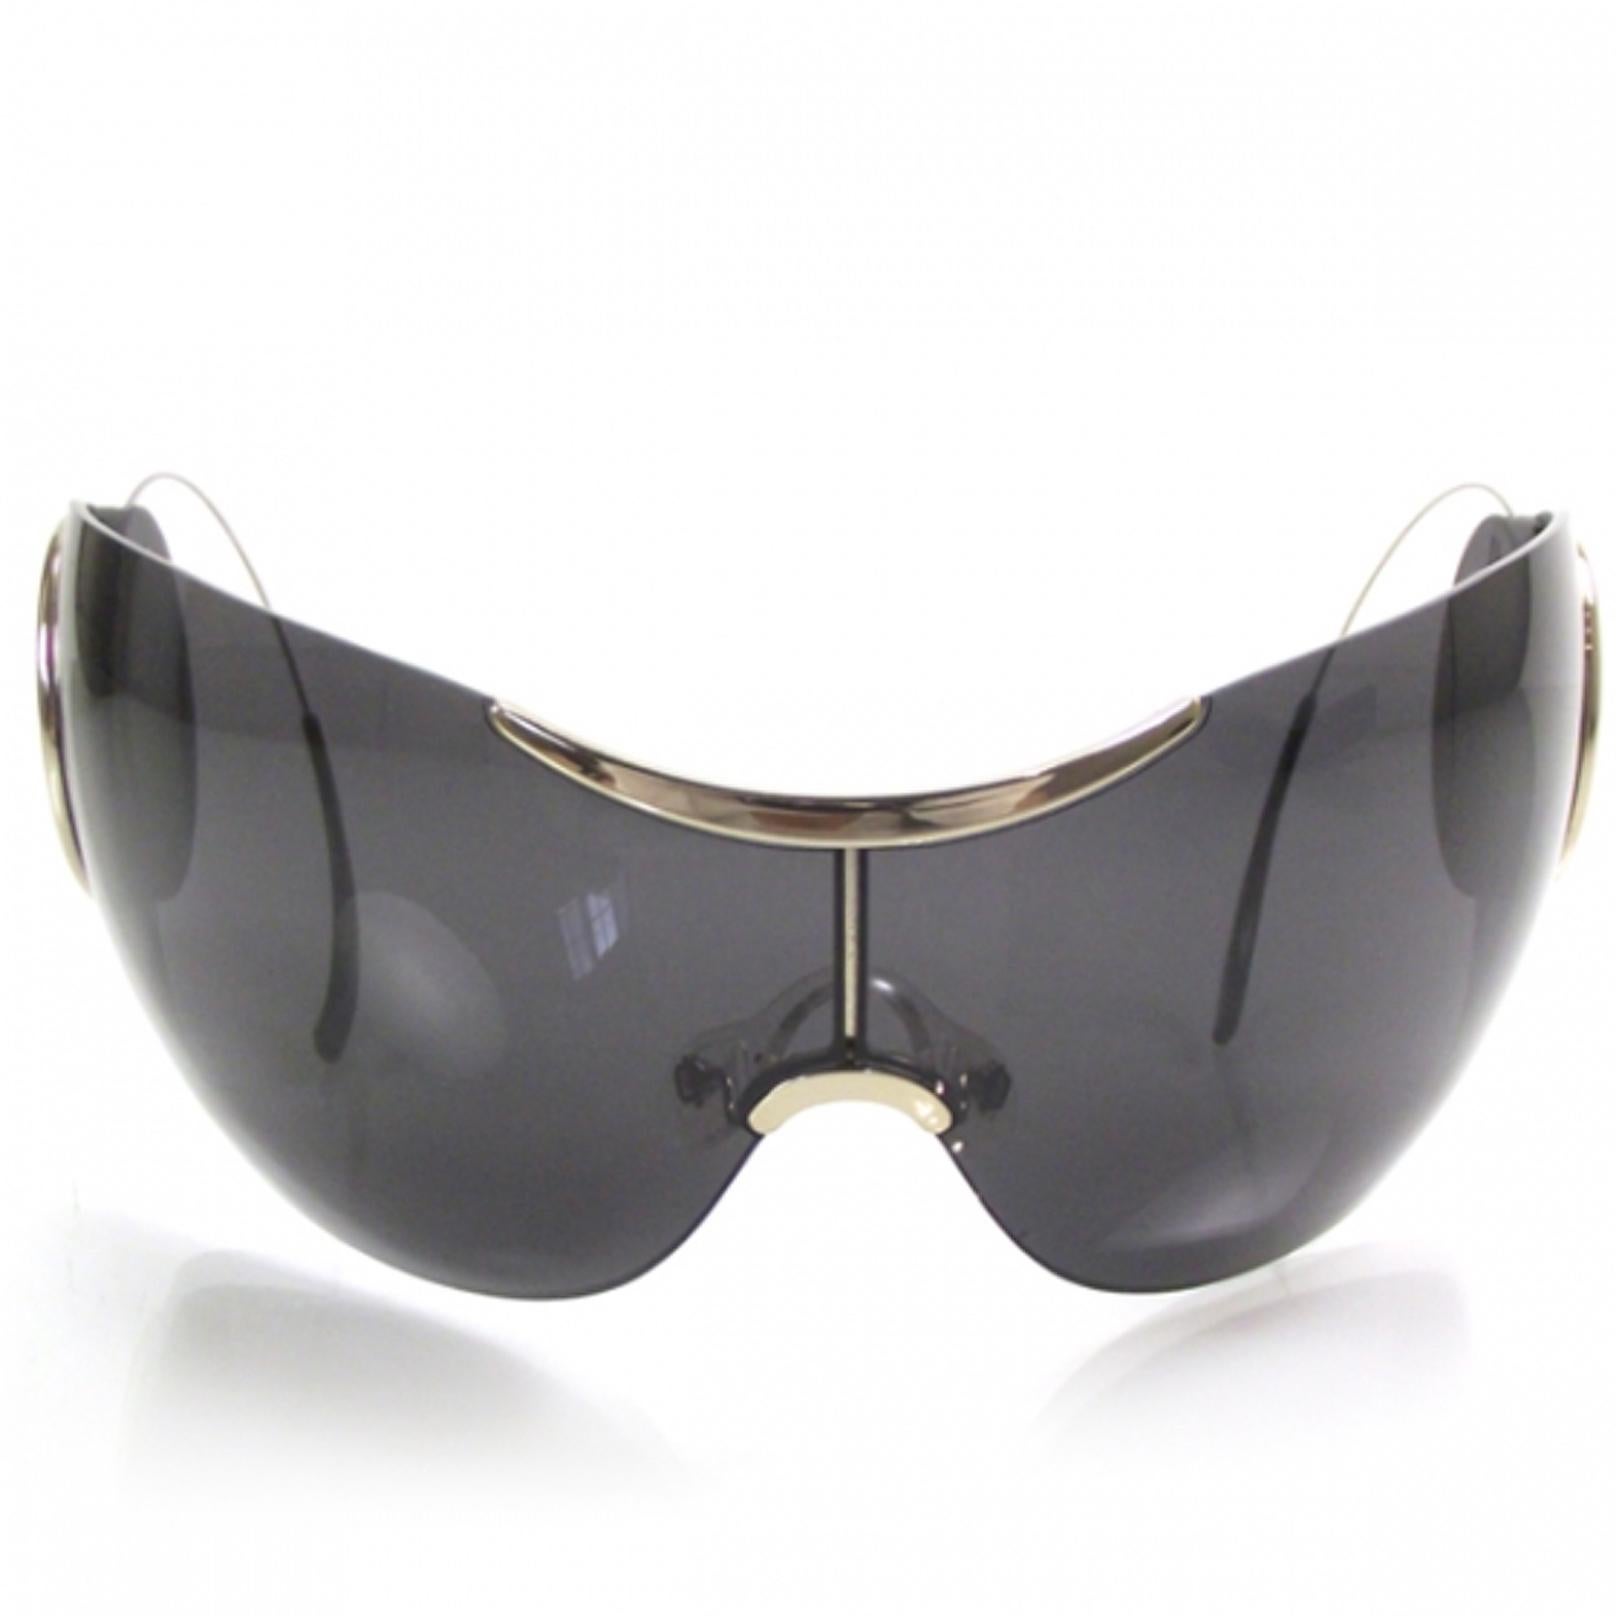 The sunglasses are super stylized and are so sophisticated they appear simple. They have a rimless single piece curved lens of solid gray tint inspired by the classic aviator style but totally new. These also lack a frame for the arms. The rear